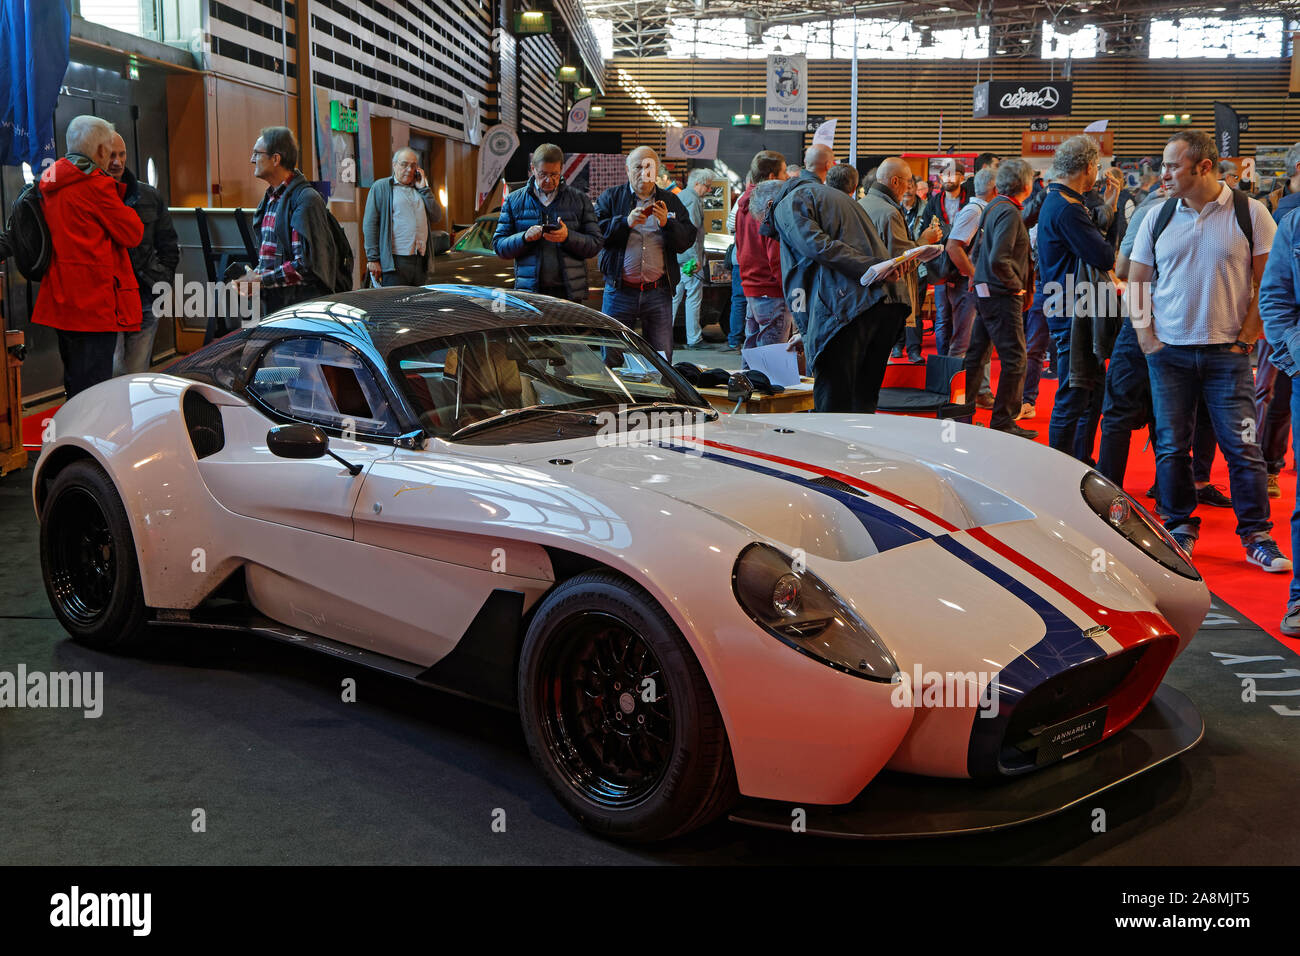 LYON, FRANCE, November 8, 2019 : Crowd at the motorshow. The Salon Epoq Auto stands in Lyon since 1979 with more than 67,000 visitors each year. Stock Photo